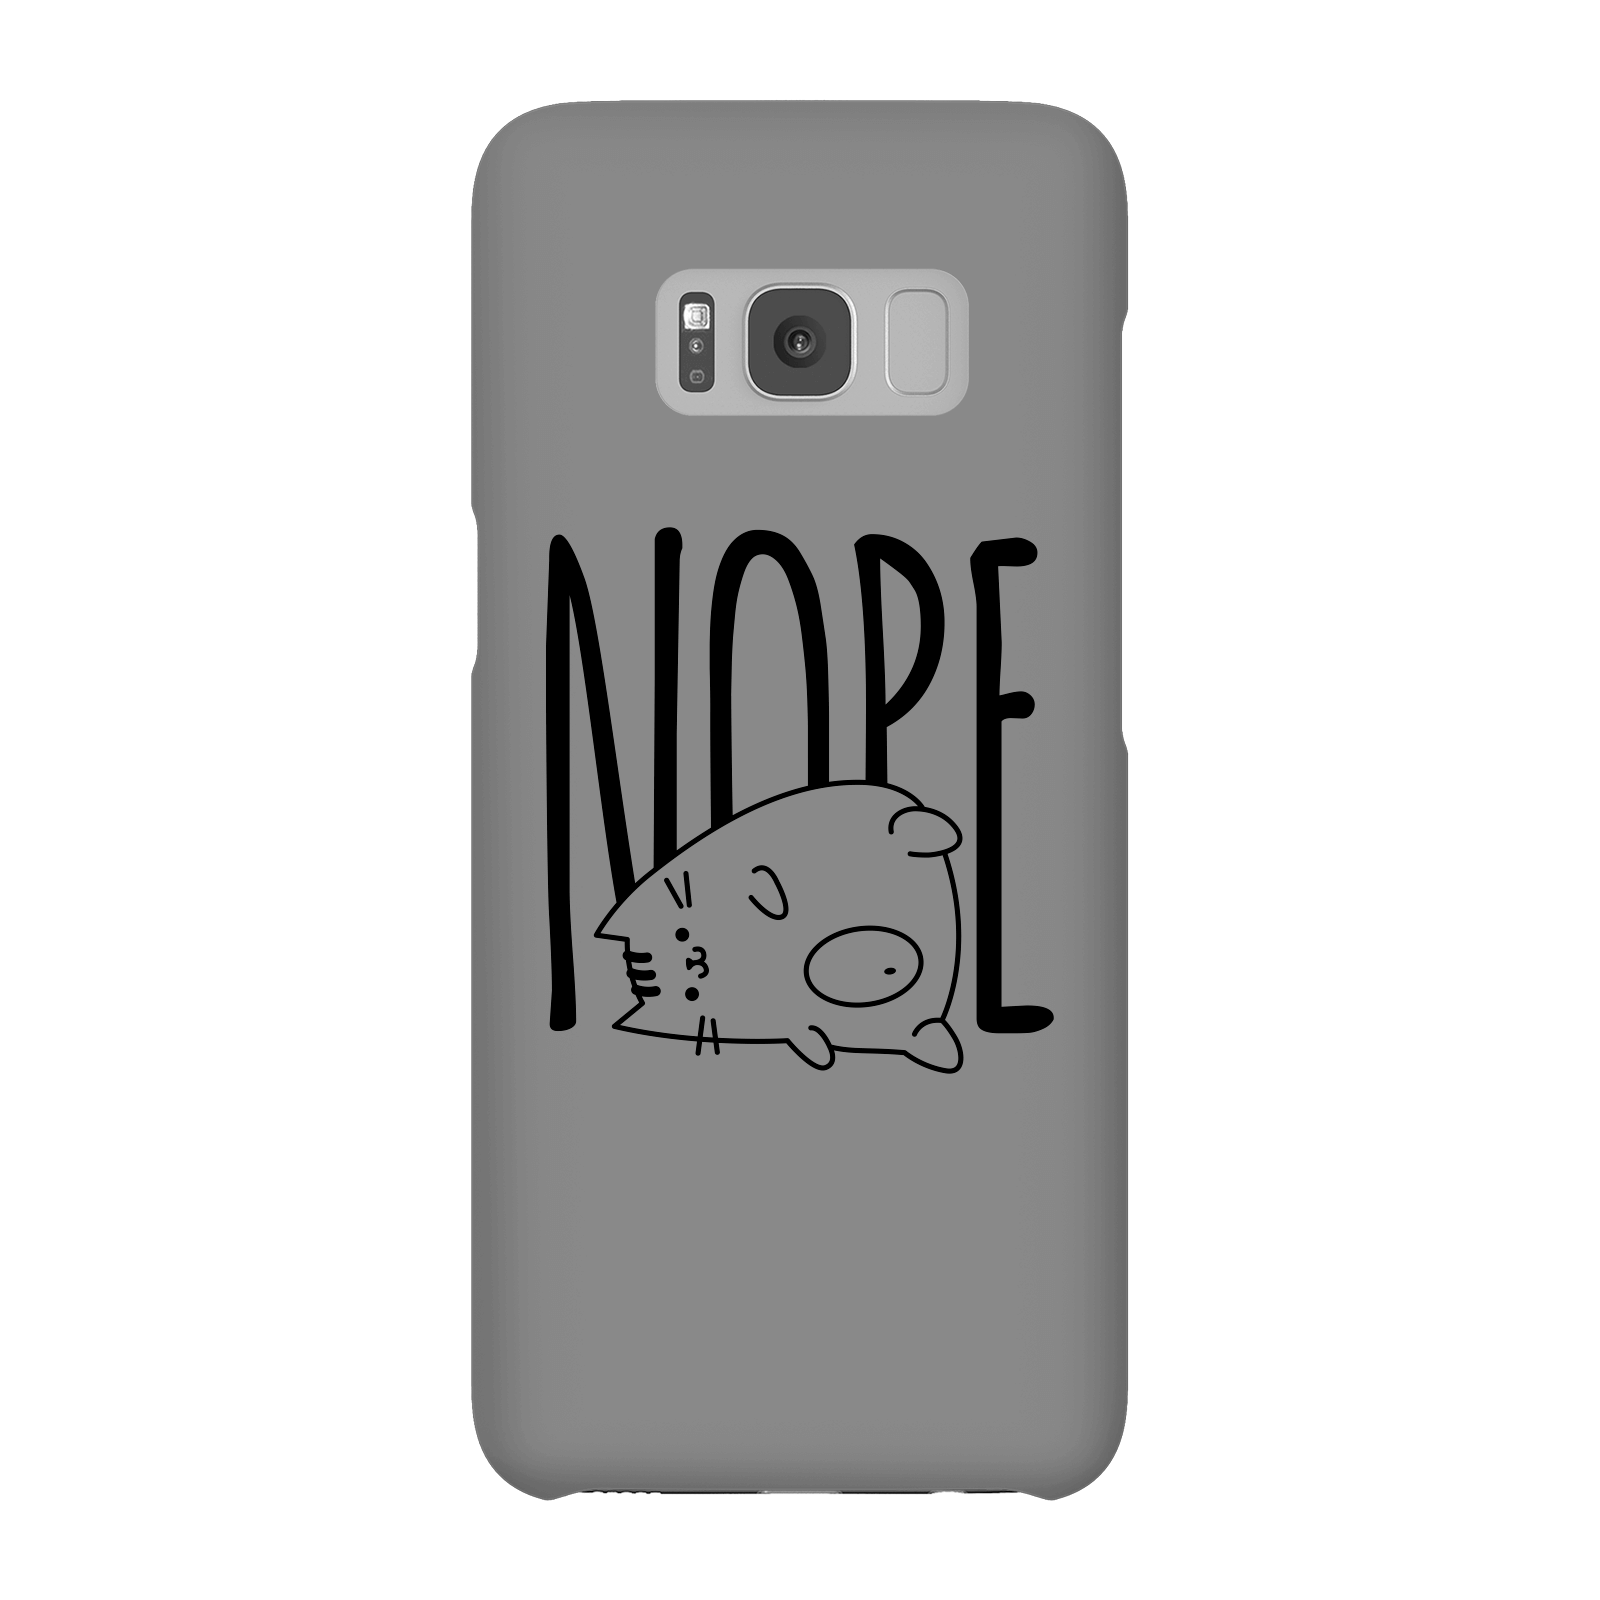 nope phone case for iphone and android - samsung s8 - snap case - matte